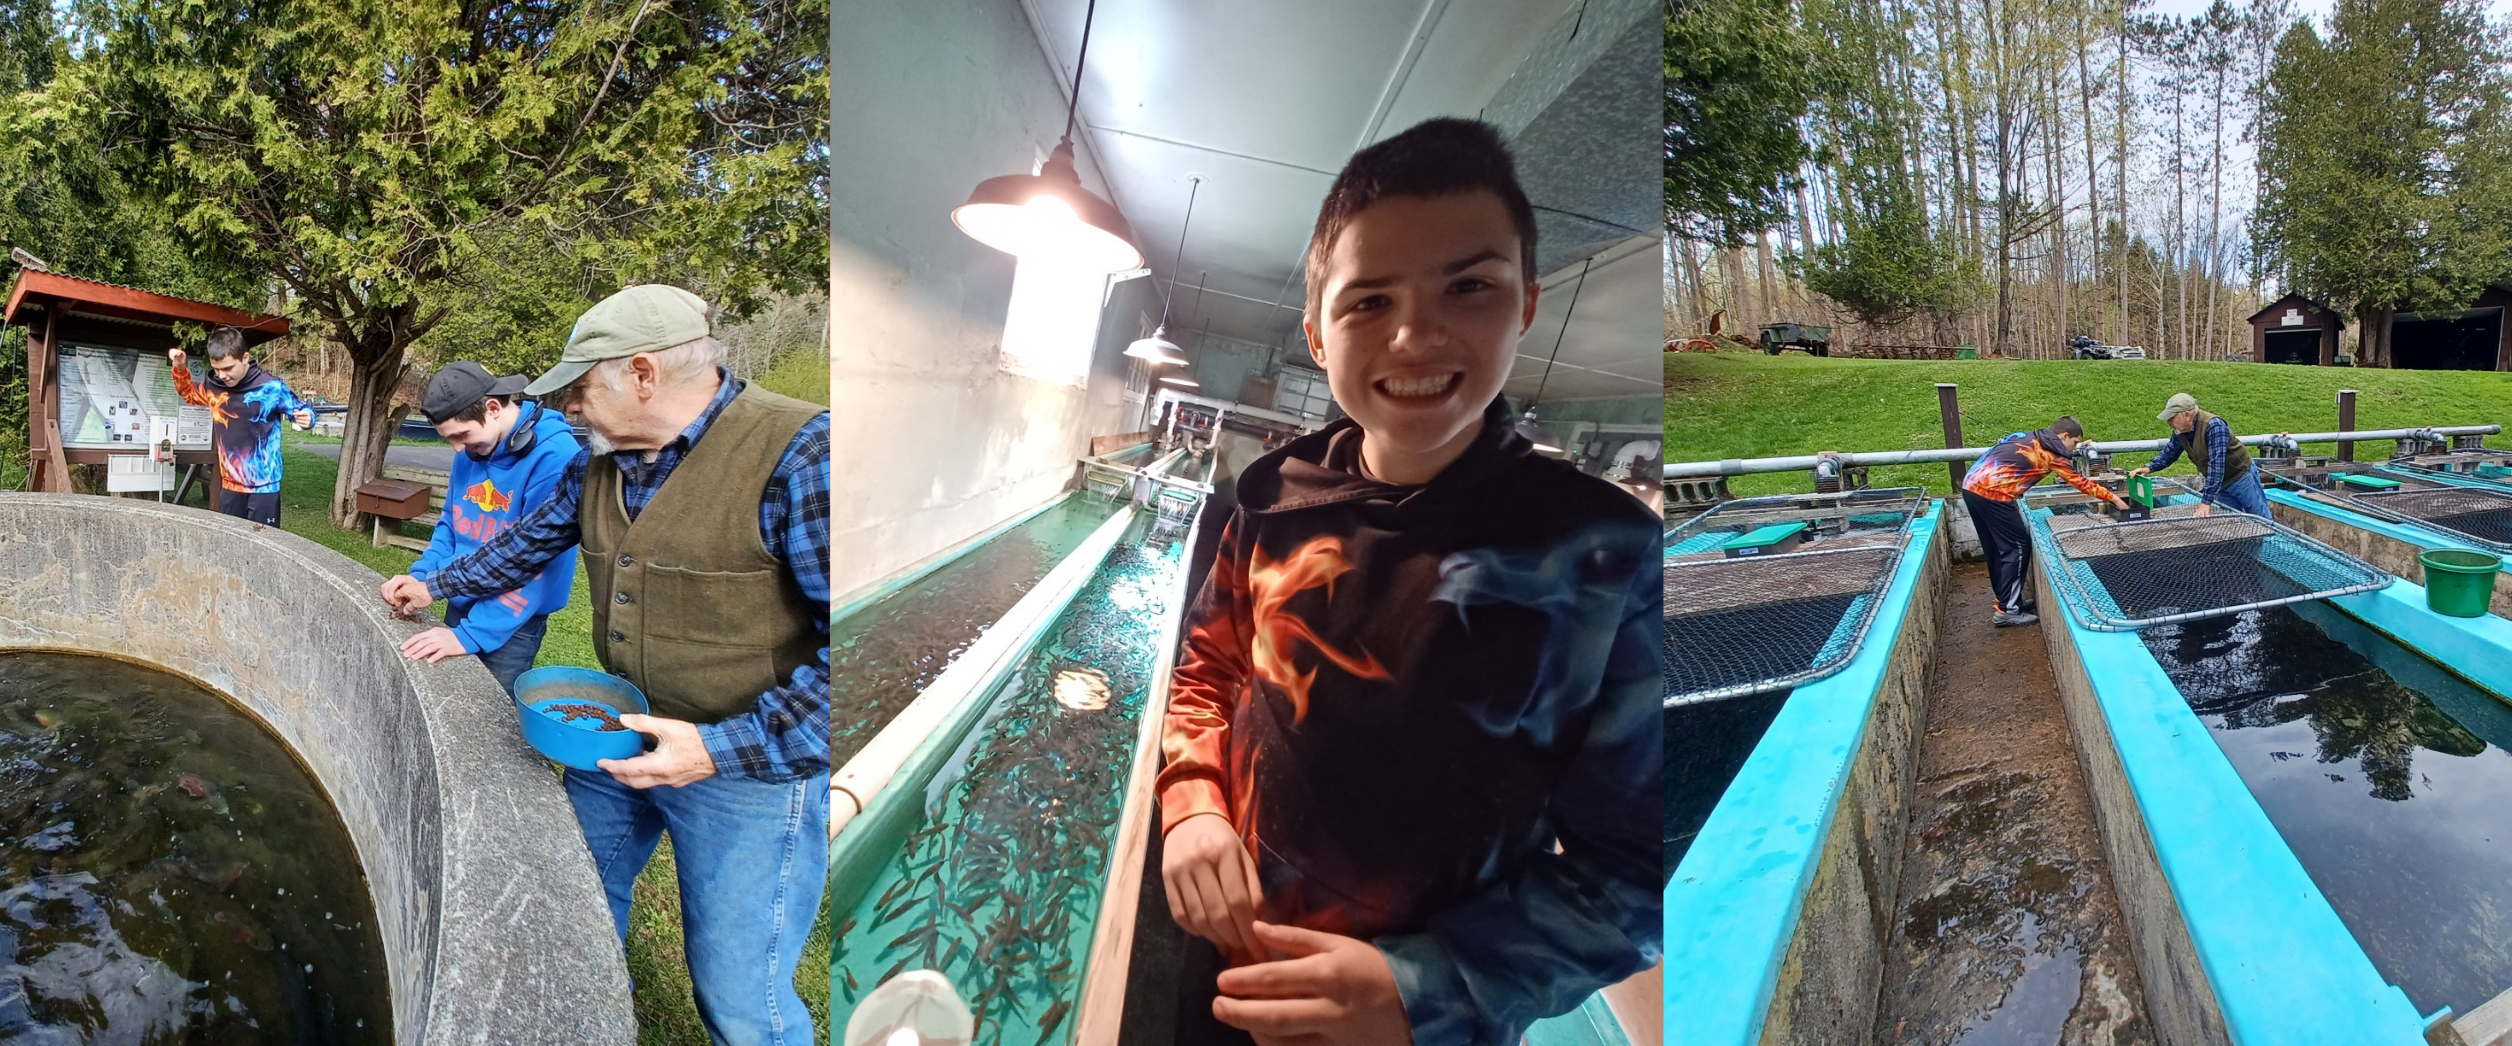 OESJ's lifeskills class took a trip to a fish hatchery and had a great time discovering the amazing world of fish farming